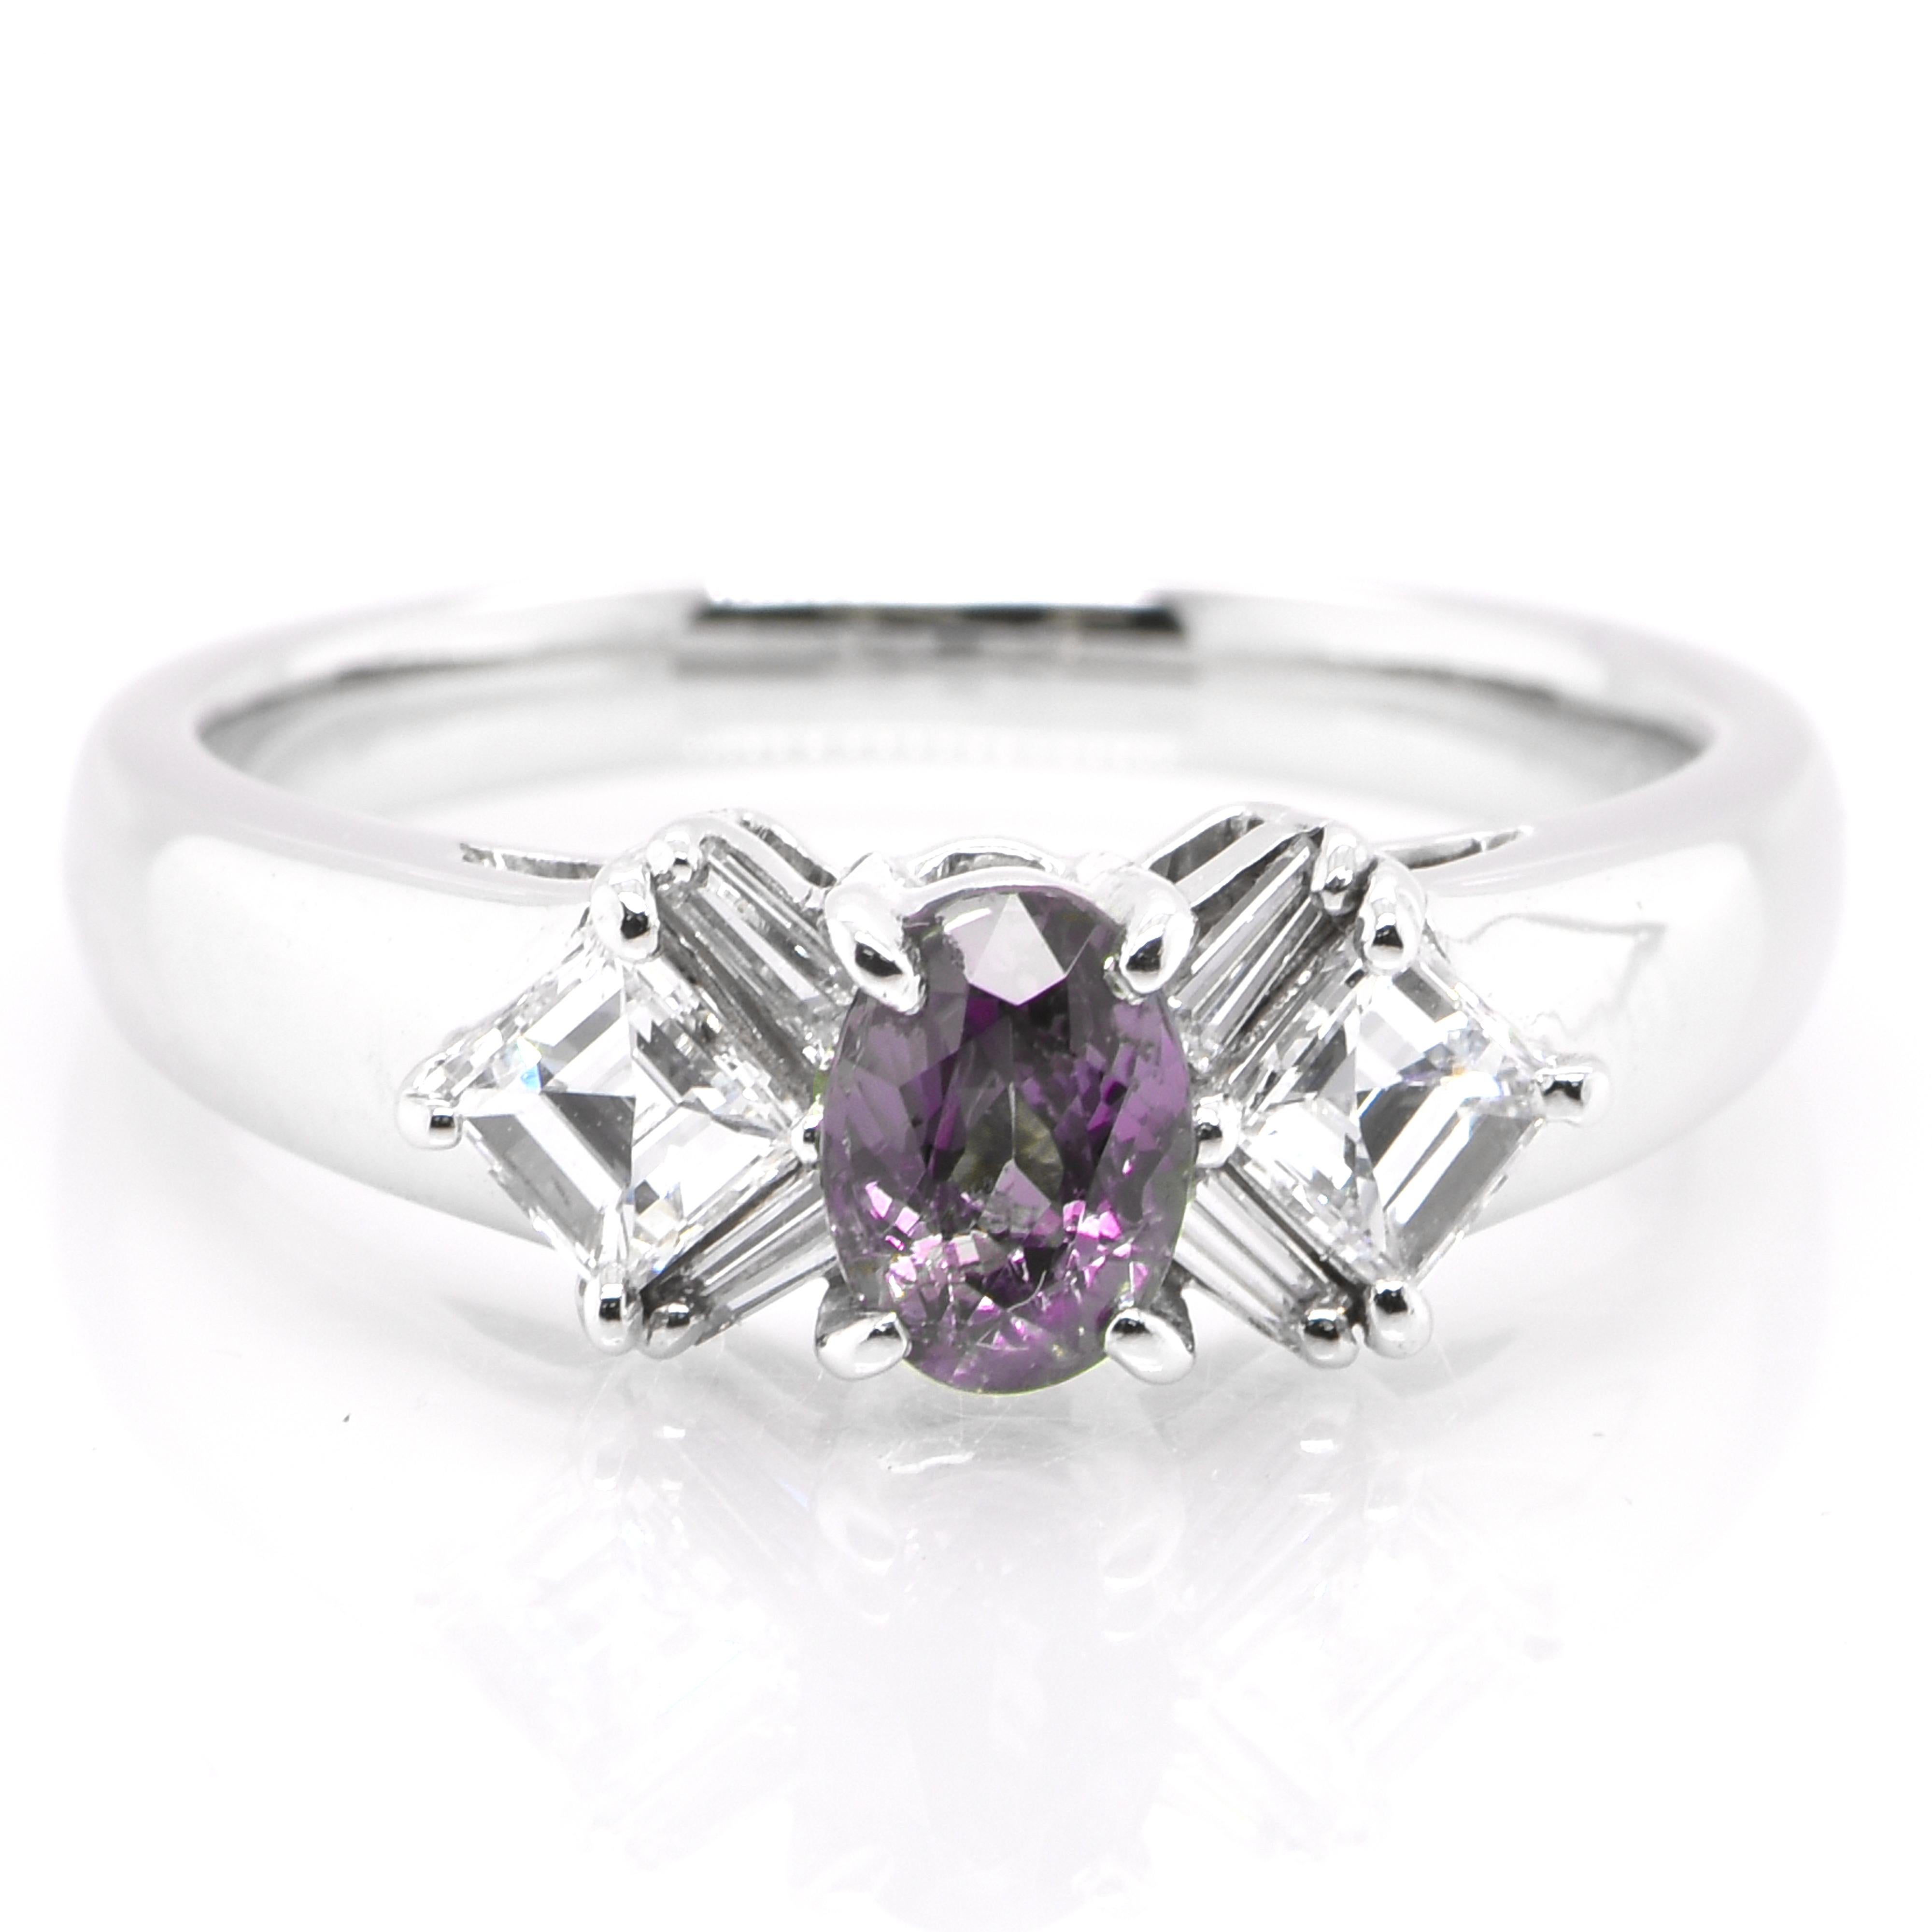 A gorgeous ring featuring a 0.55 Carat, Natural Alexandrite and 0.49 Carats of Diamond Accents set in Platinum. Alexandrites produce a natural color-change phenomenon as they exhibit a Bluish Green Color under Fluorescent Light whereas a Purplish